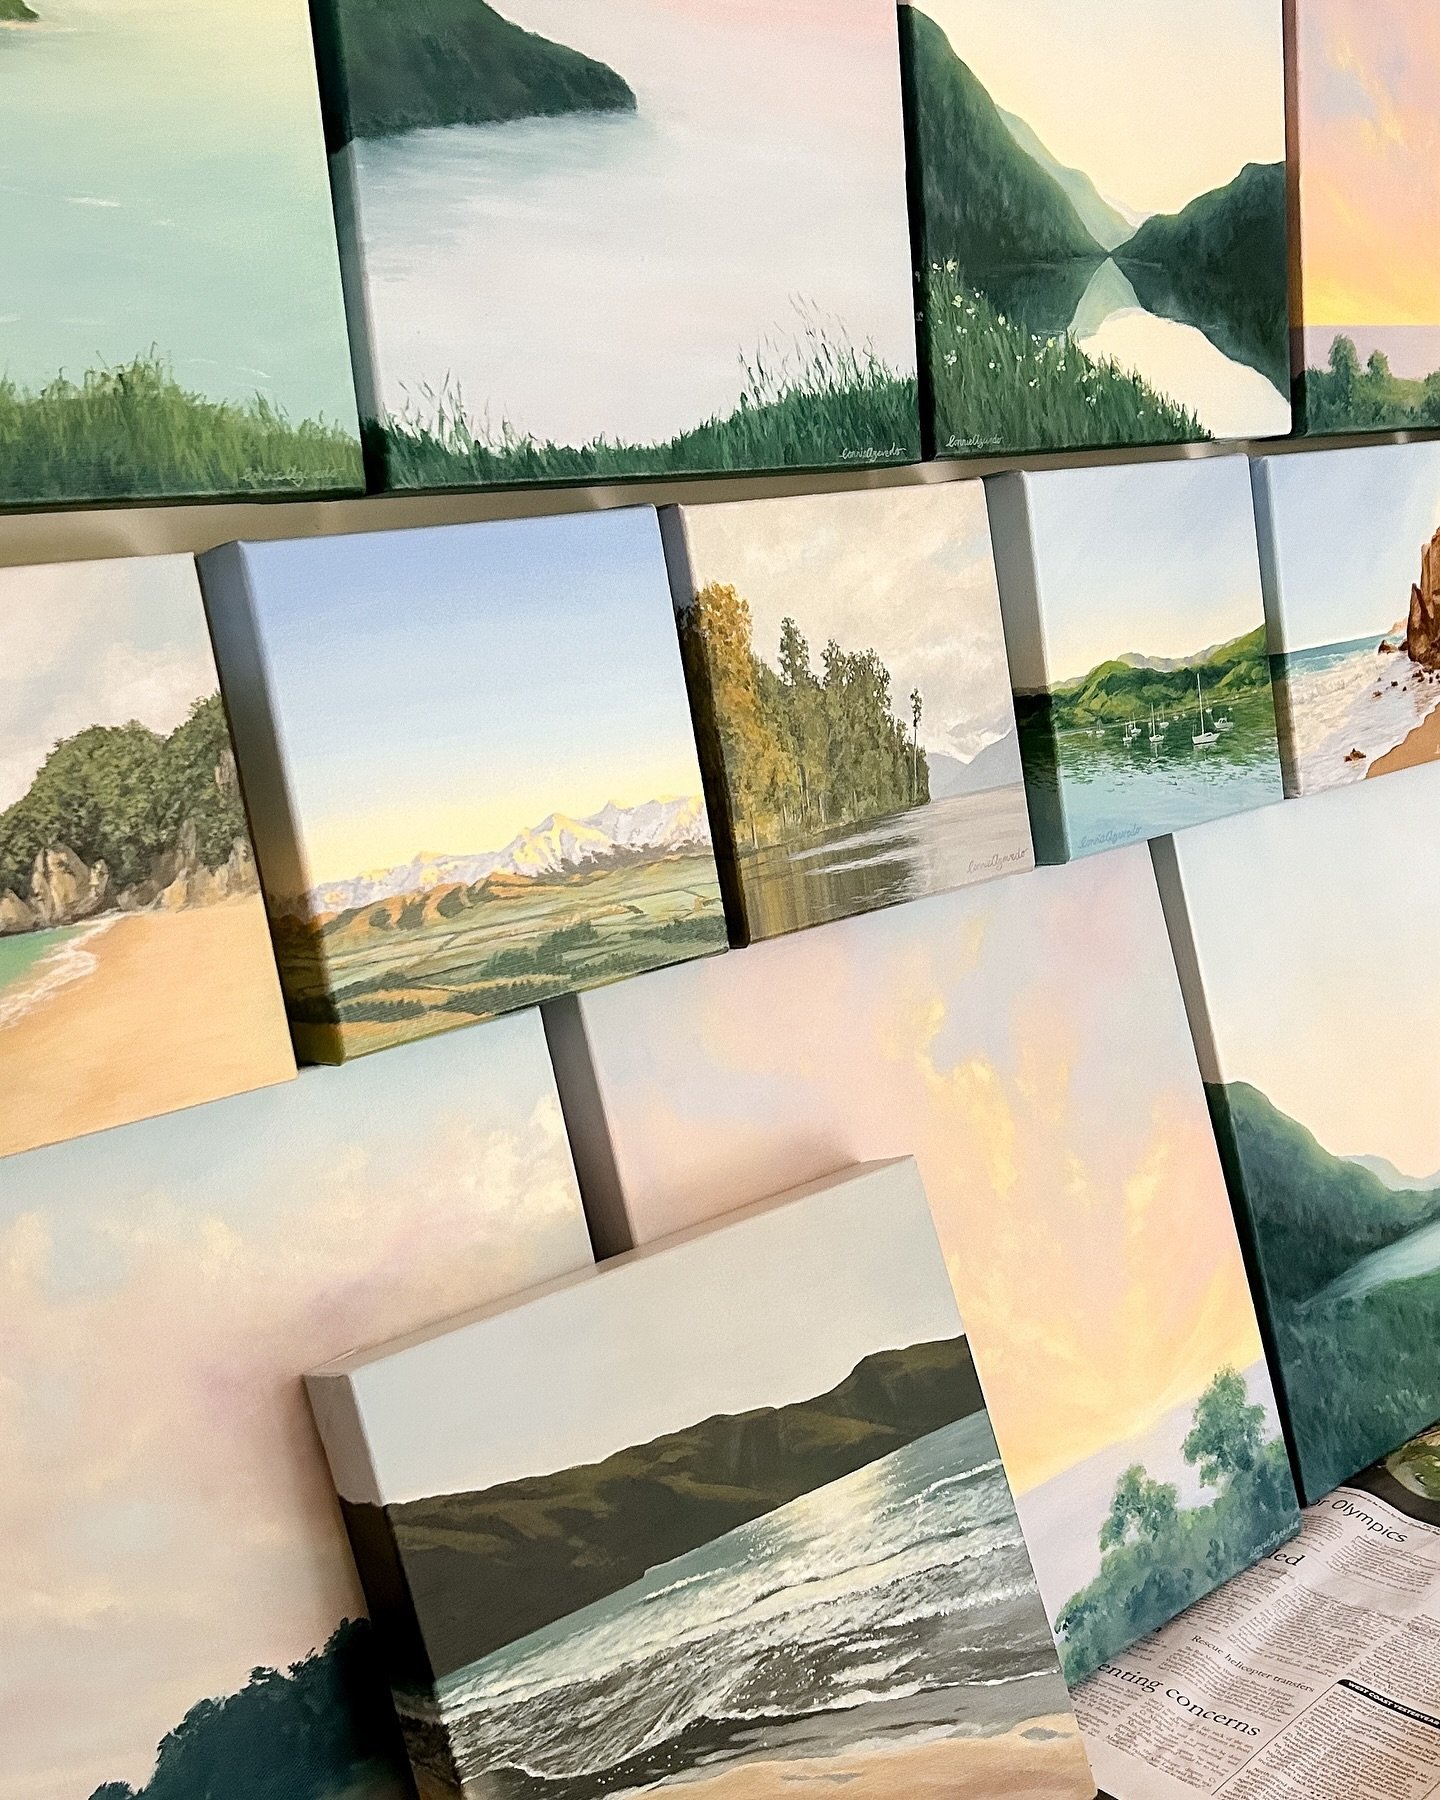 Some of the beautiful art coming with me to Art in the Park Greymouth. Next Saturday &amp; Sunday from 10am at Greymouth High School. ✨

#artintheparkgreymouth #nzartist #oillandscapepainting #acryliclandscapepainting 
#paintingnzlandscapes #naturepa